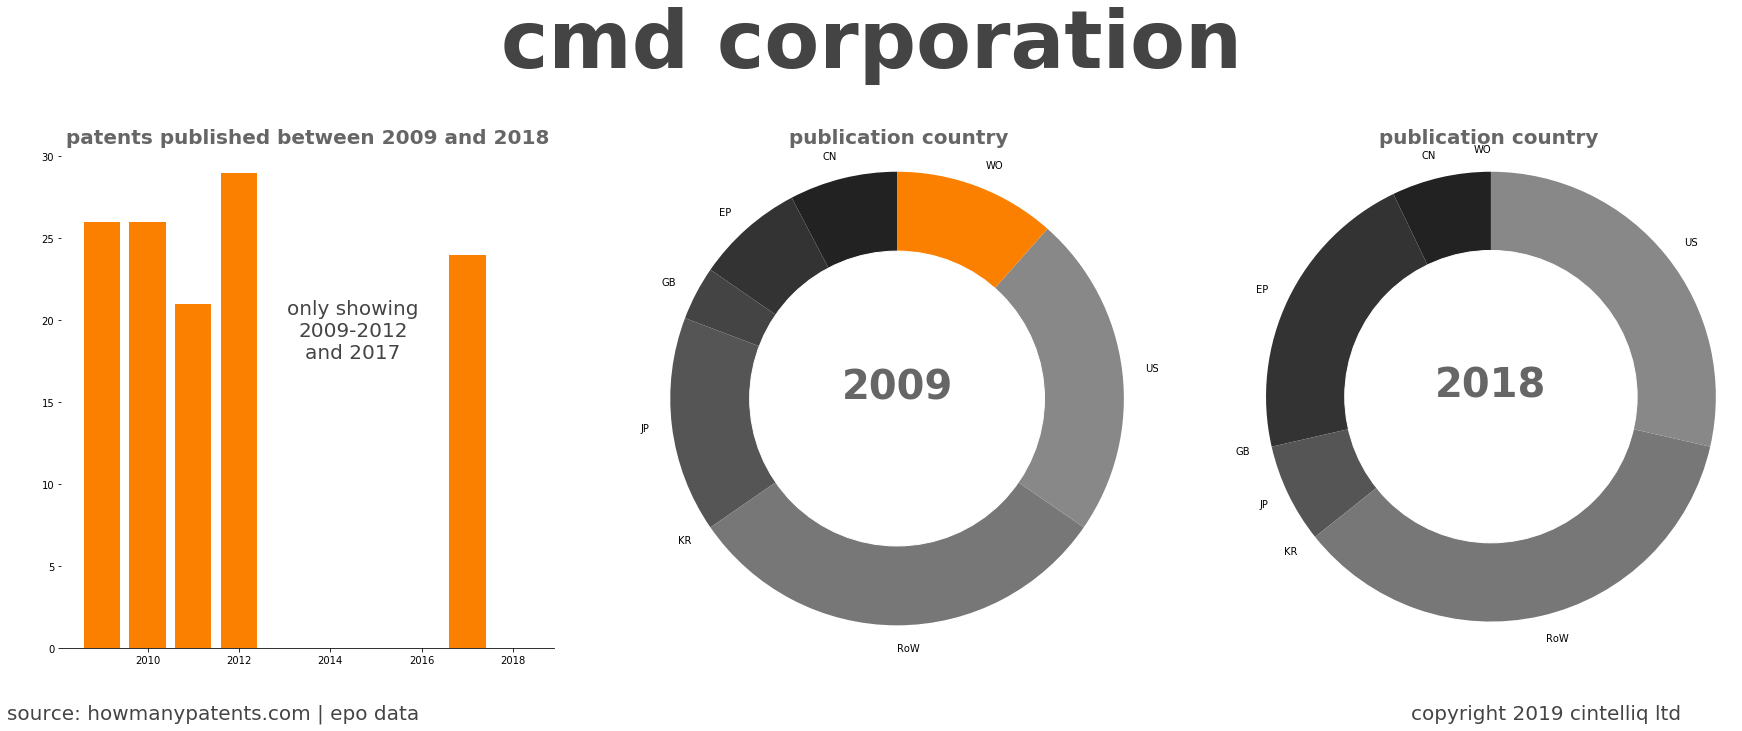 summary of patents for Cmd Corporation